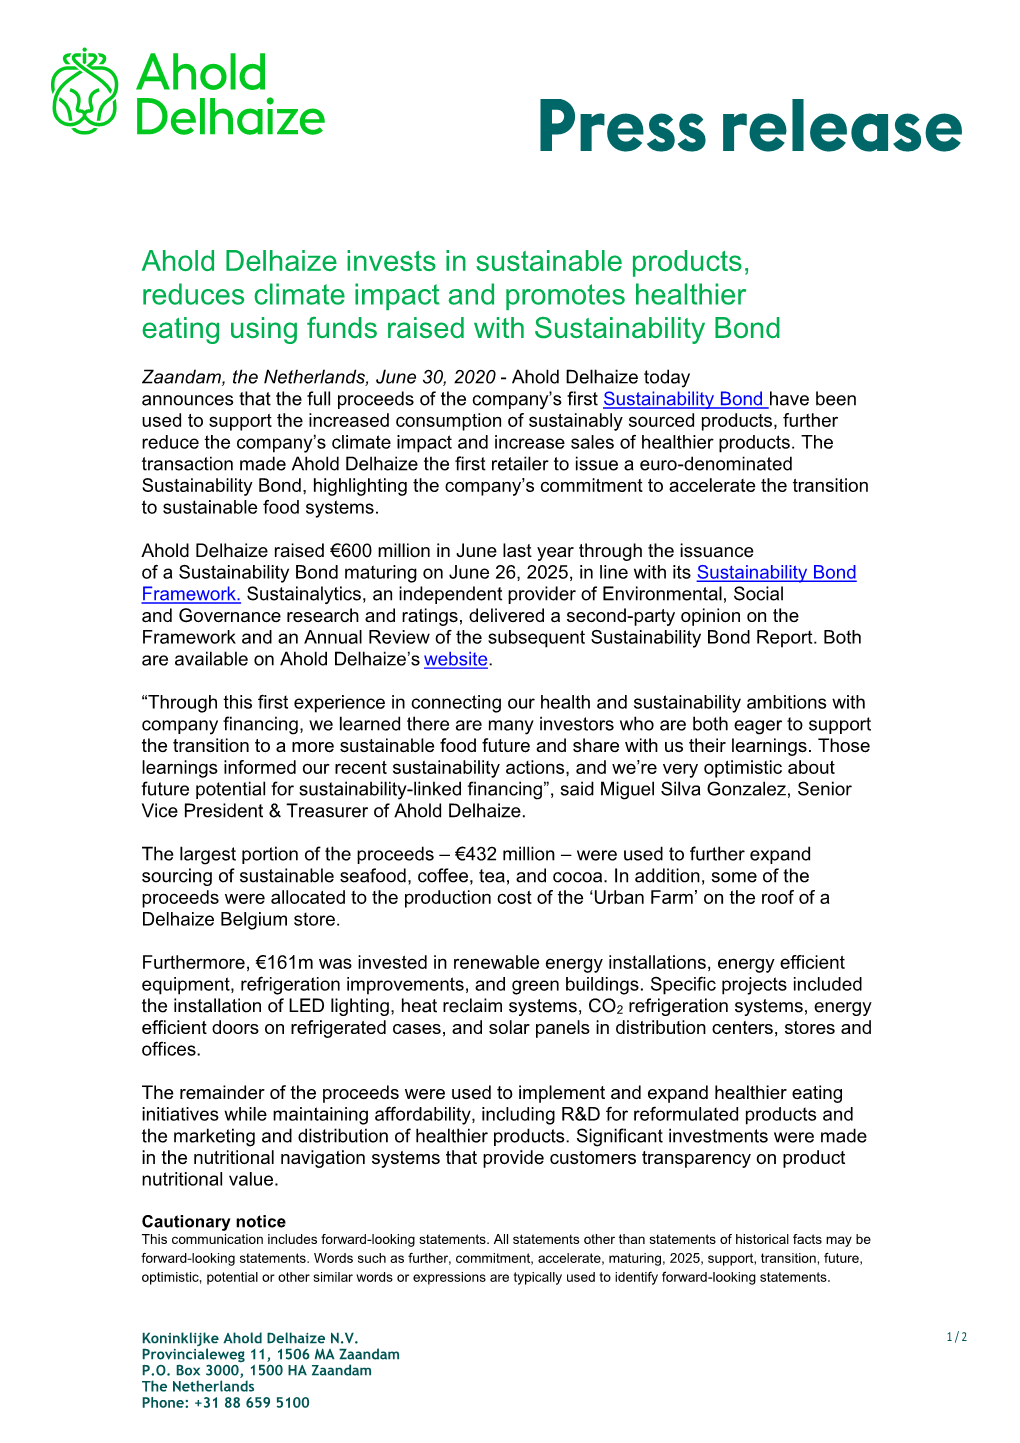 Ahold Delhaize Invests in Sustainable Products, Reduces Climate Impact and Promotes Healthier Eating Using Funds Raised with Sustainability Bond